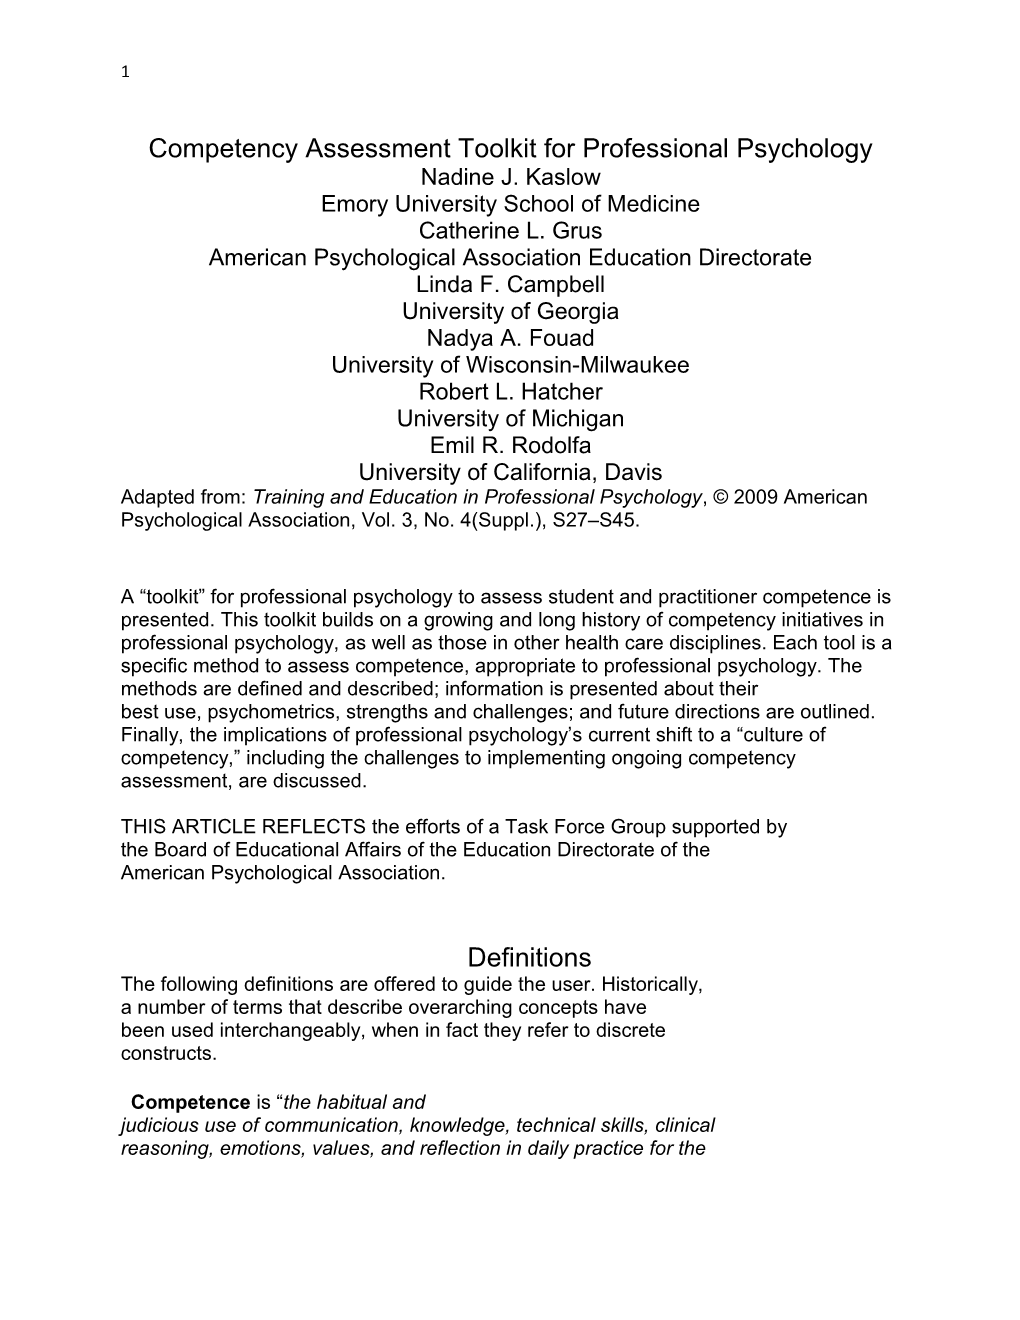 Competency Assessment Toolkit for Professional Psychology